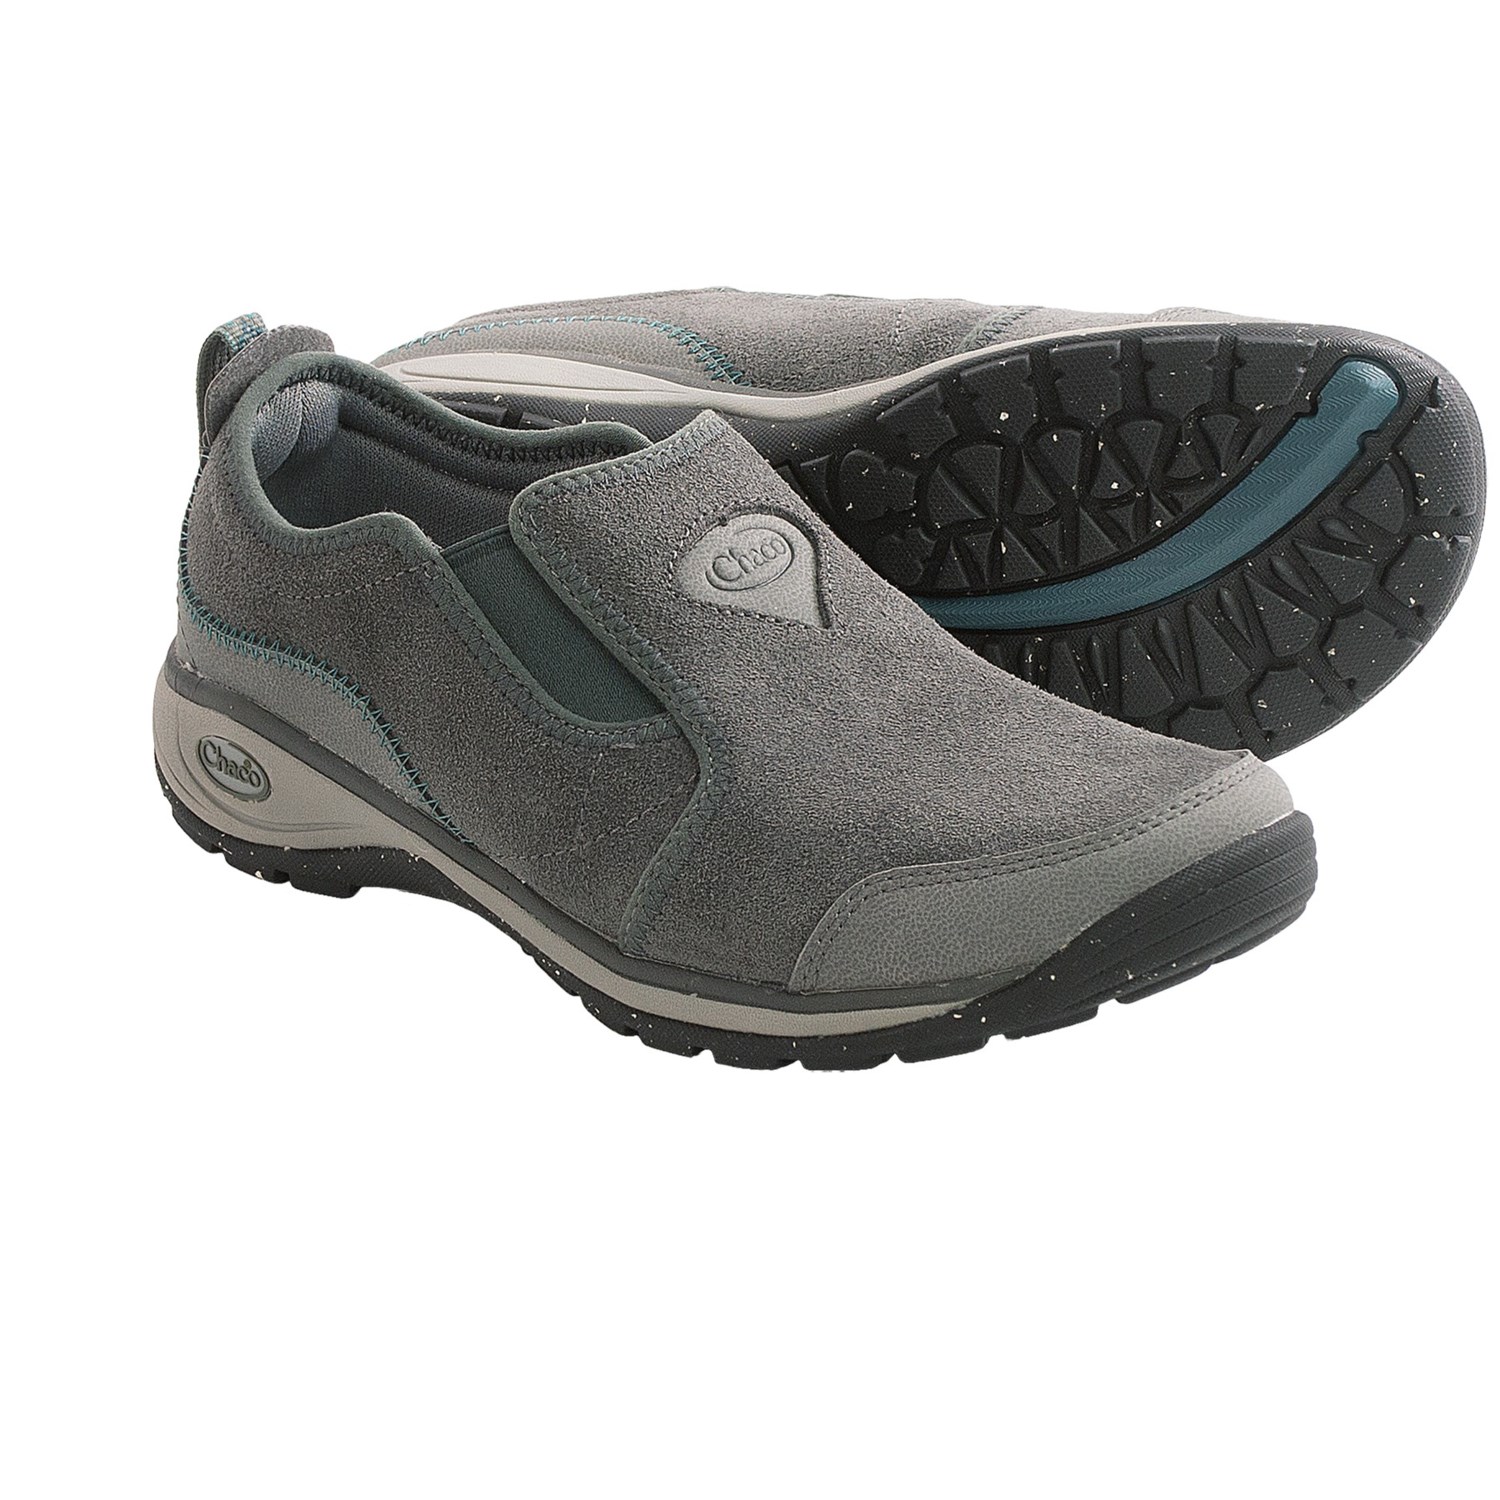 Chaco Kendry Shoes (For Women) - Save 36%